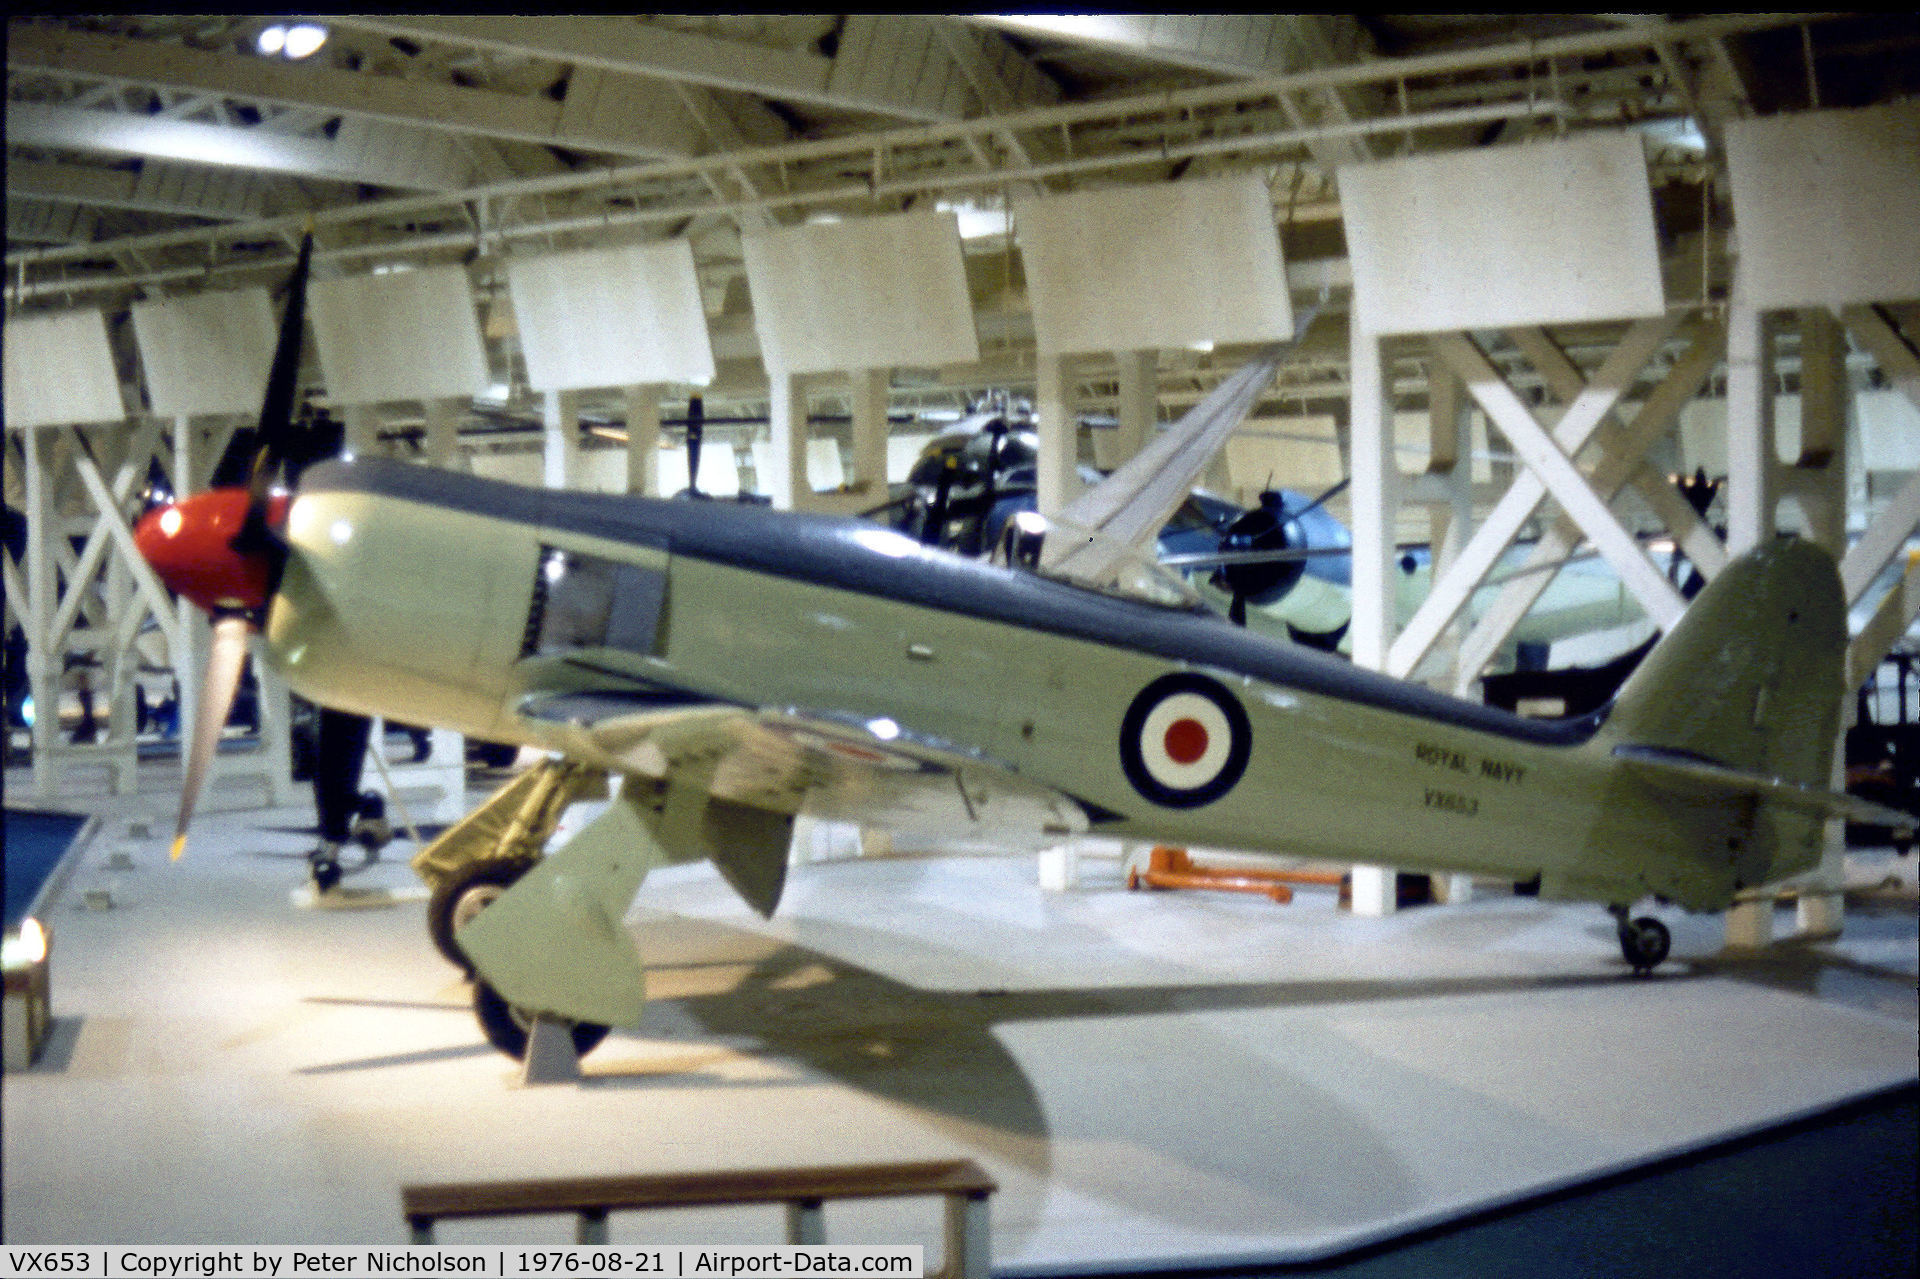 VX653, 1949 Hawker Sea Fury FB.11 C/N Not found G-BUCM/VX653, Sea Fury FB.11 as displayed at the RAF Museum at Hendon in the Summer of 1976.